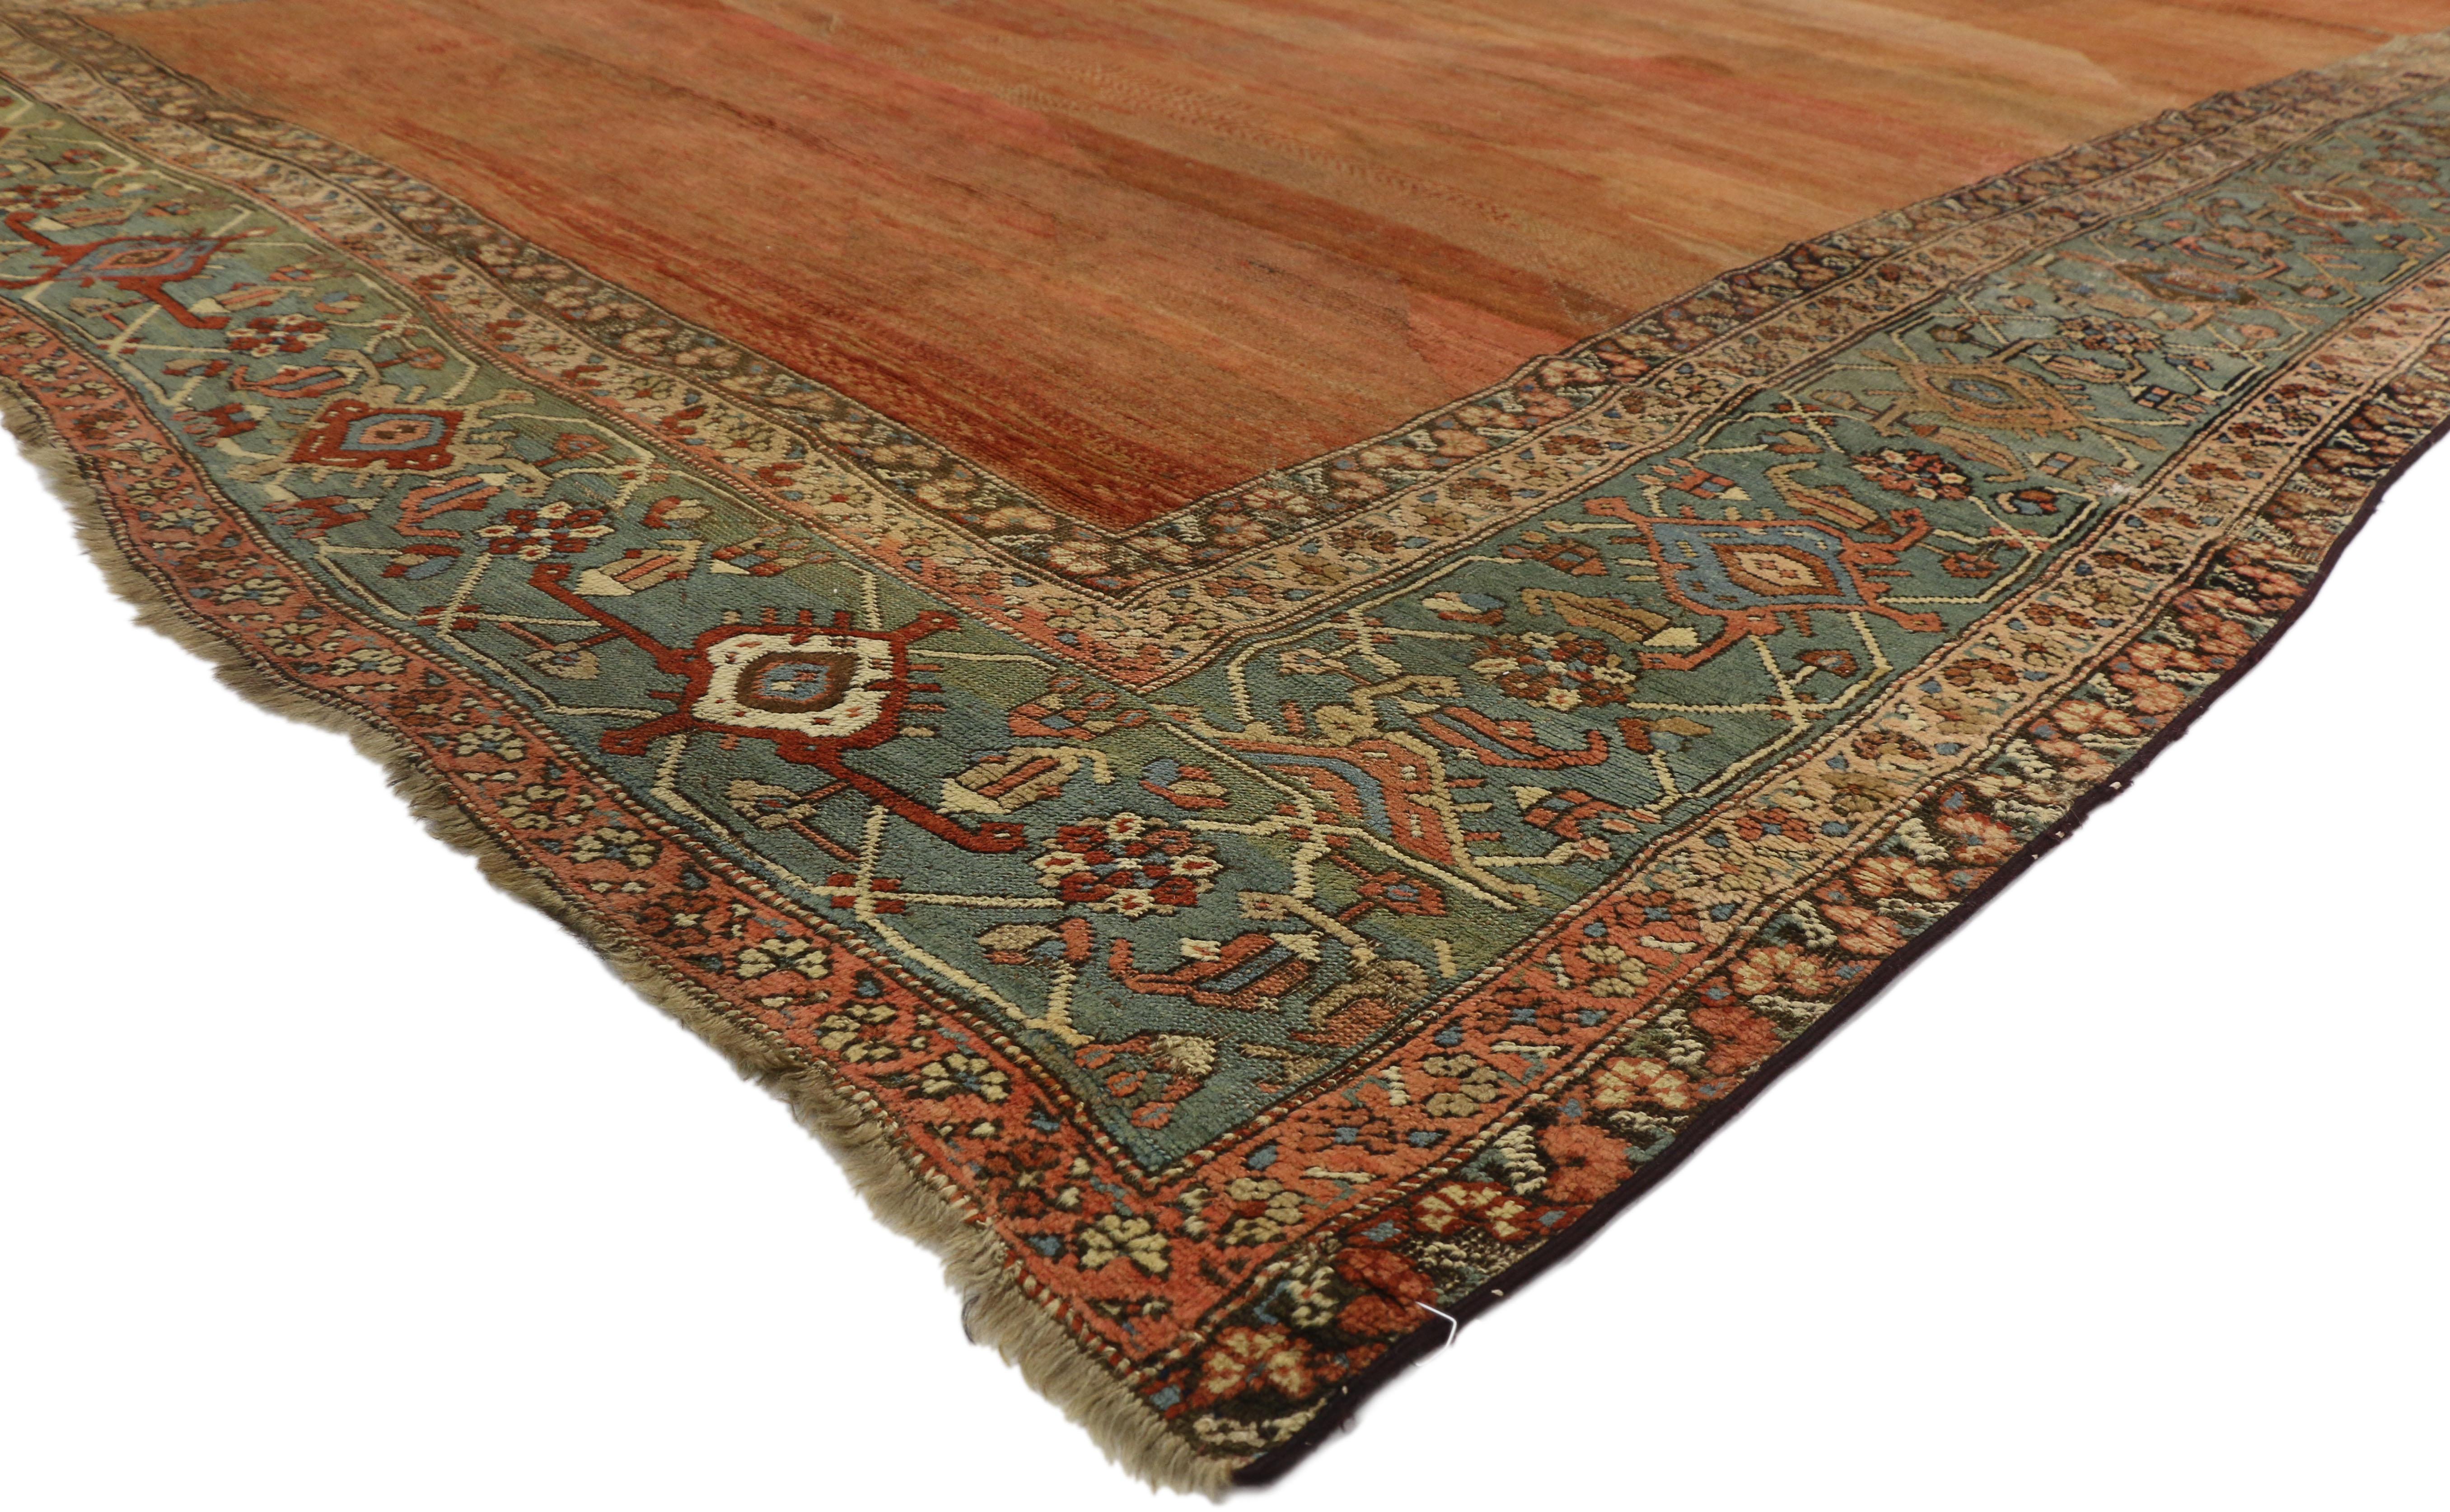 73994 Mid-19th Century Antique Persian Bakshaish Rug with Rustic Mediterranean Style. This hand-knotted wool antique Persian Bakshaish rug features a beautifully abrashed field with rust, brick red, and terra cotta striations highlighting its